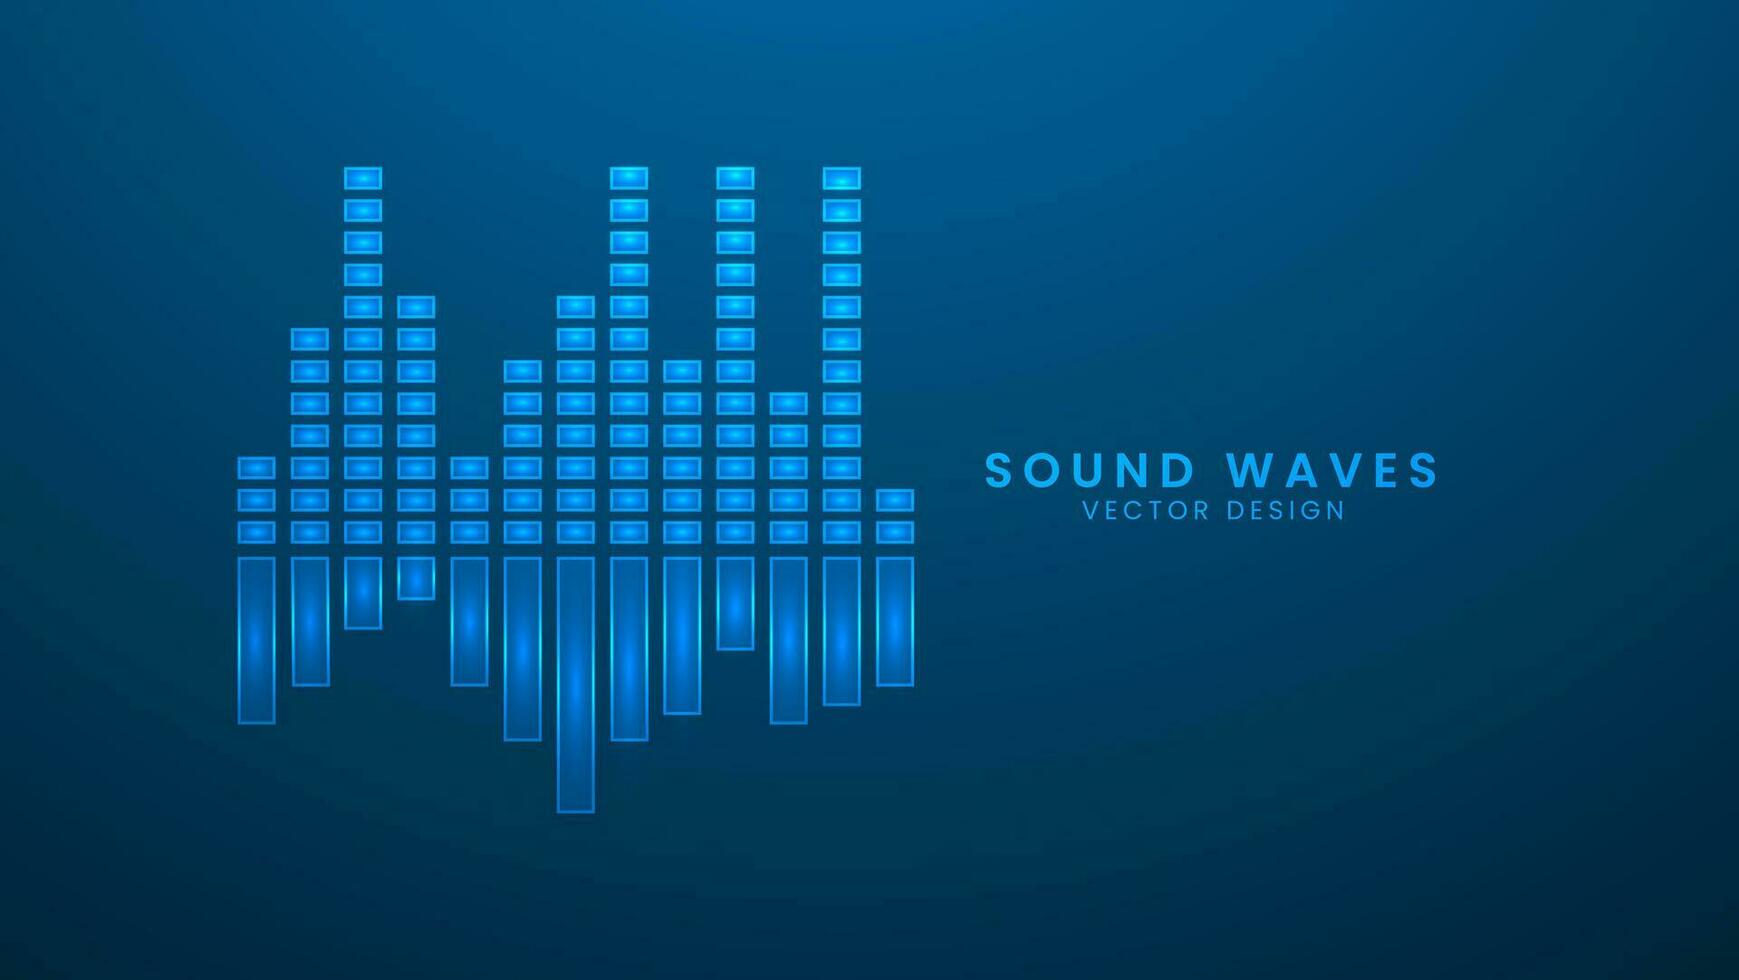 Sound waves of the equalizer. Music sound equalizer interface. Vector illustration with light effect and neon